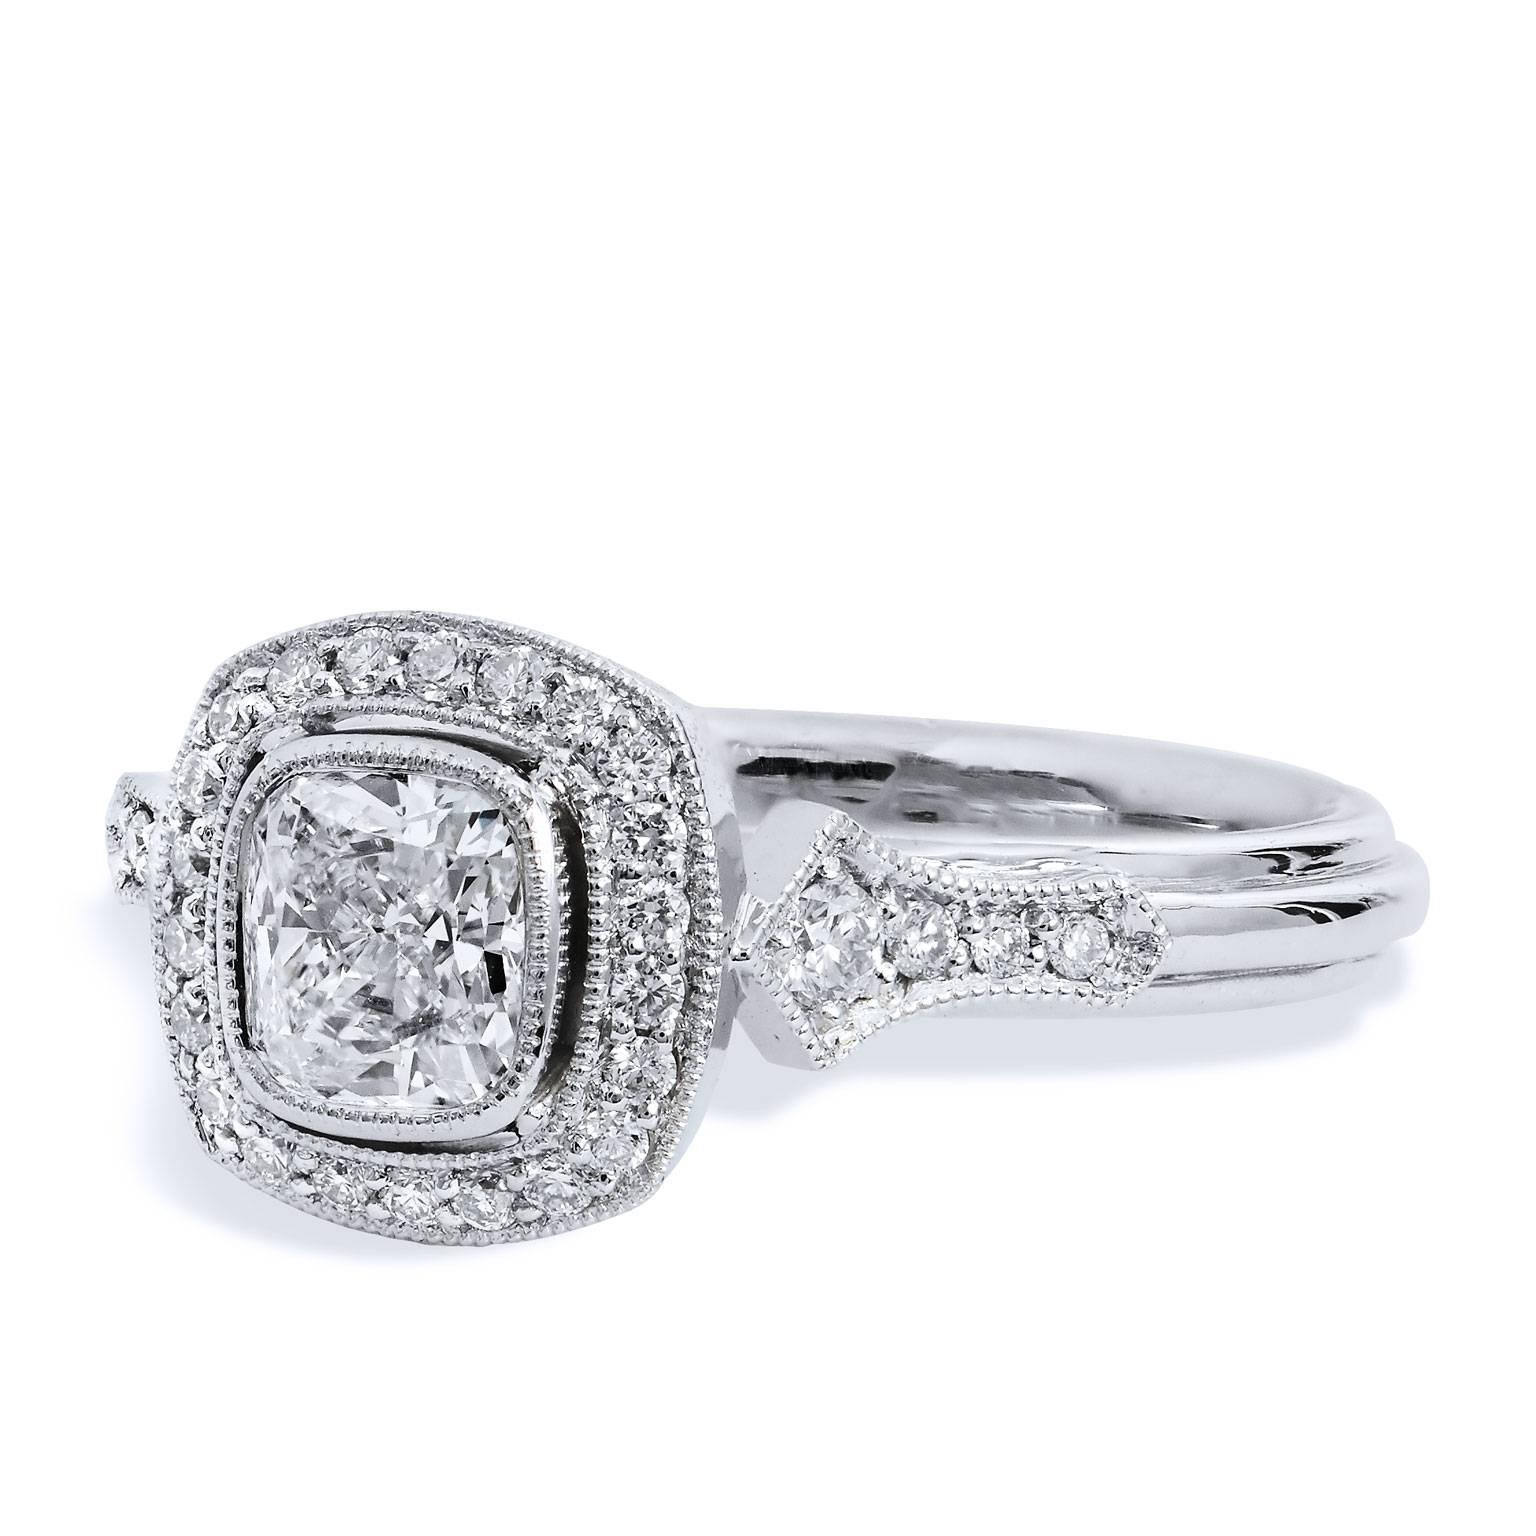 GIA Certified 0.74 Carat Round Brilliant Cut Diamond Platinum Engagement Ring

This is a one of a kind, handmade ring by H&H Jewels.  

This gorgeous center stone is a 0.74 round brilliant cut diamond (I/VVS2: GIA #2141876223) old mine cushion cut